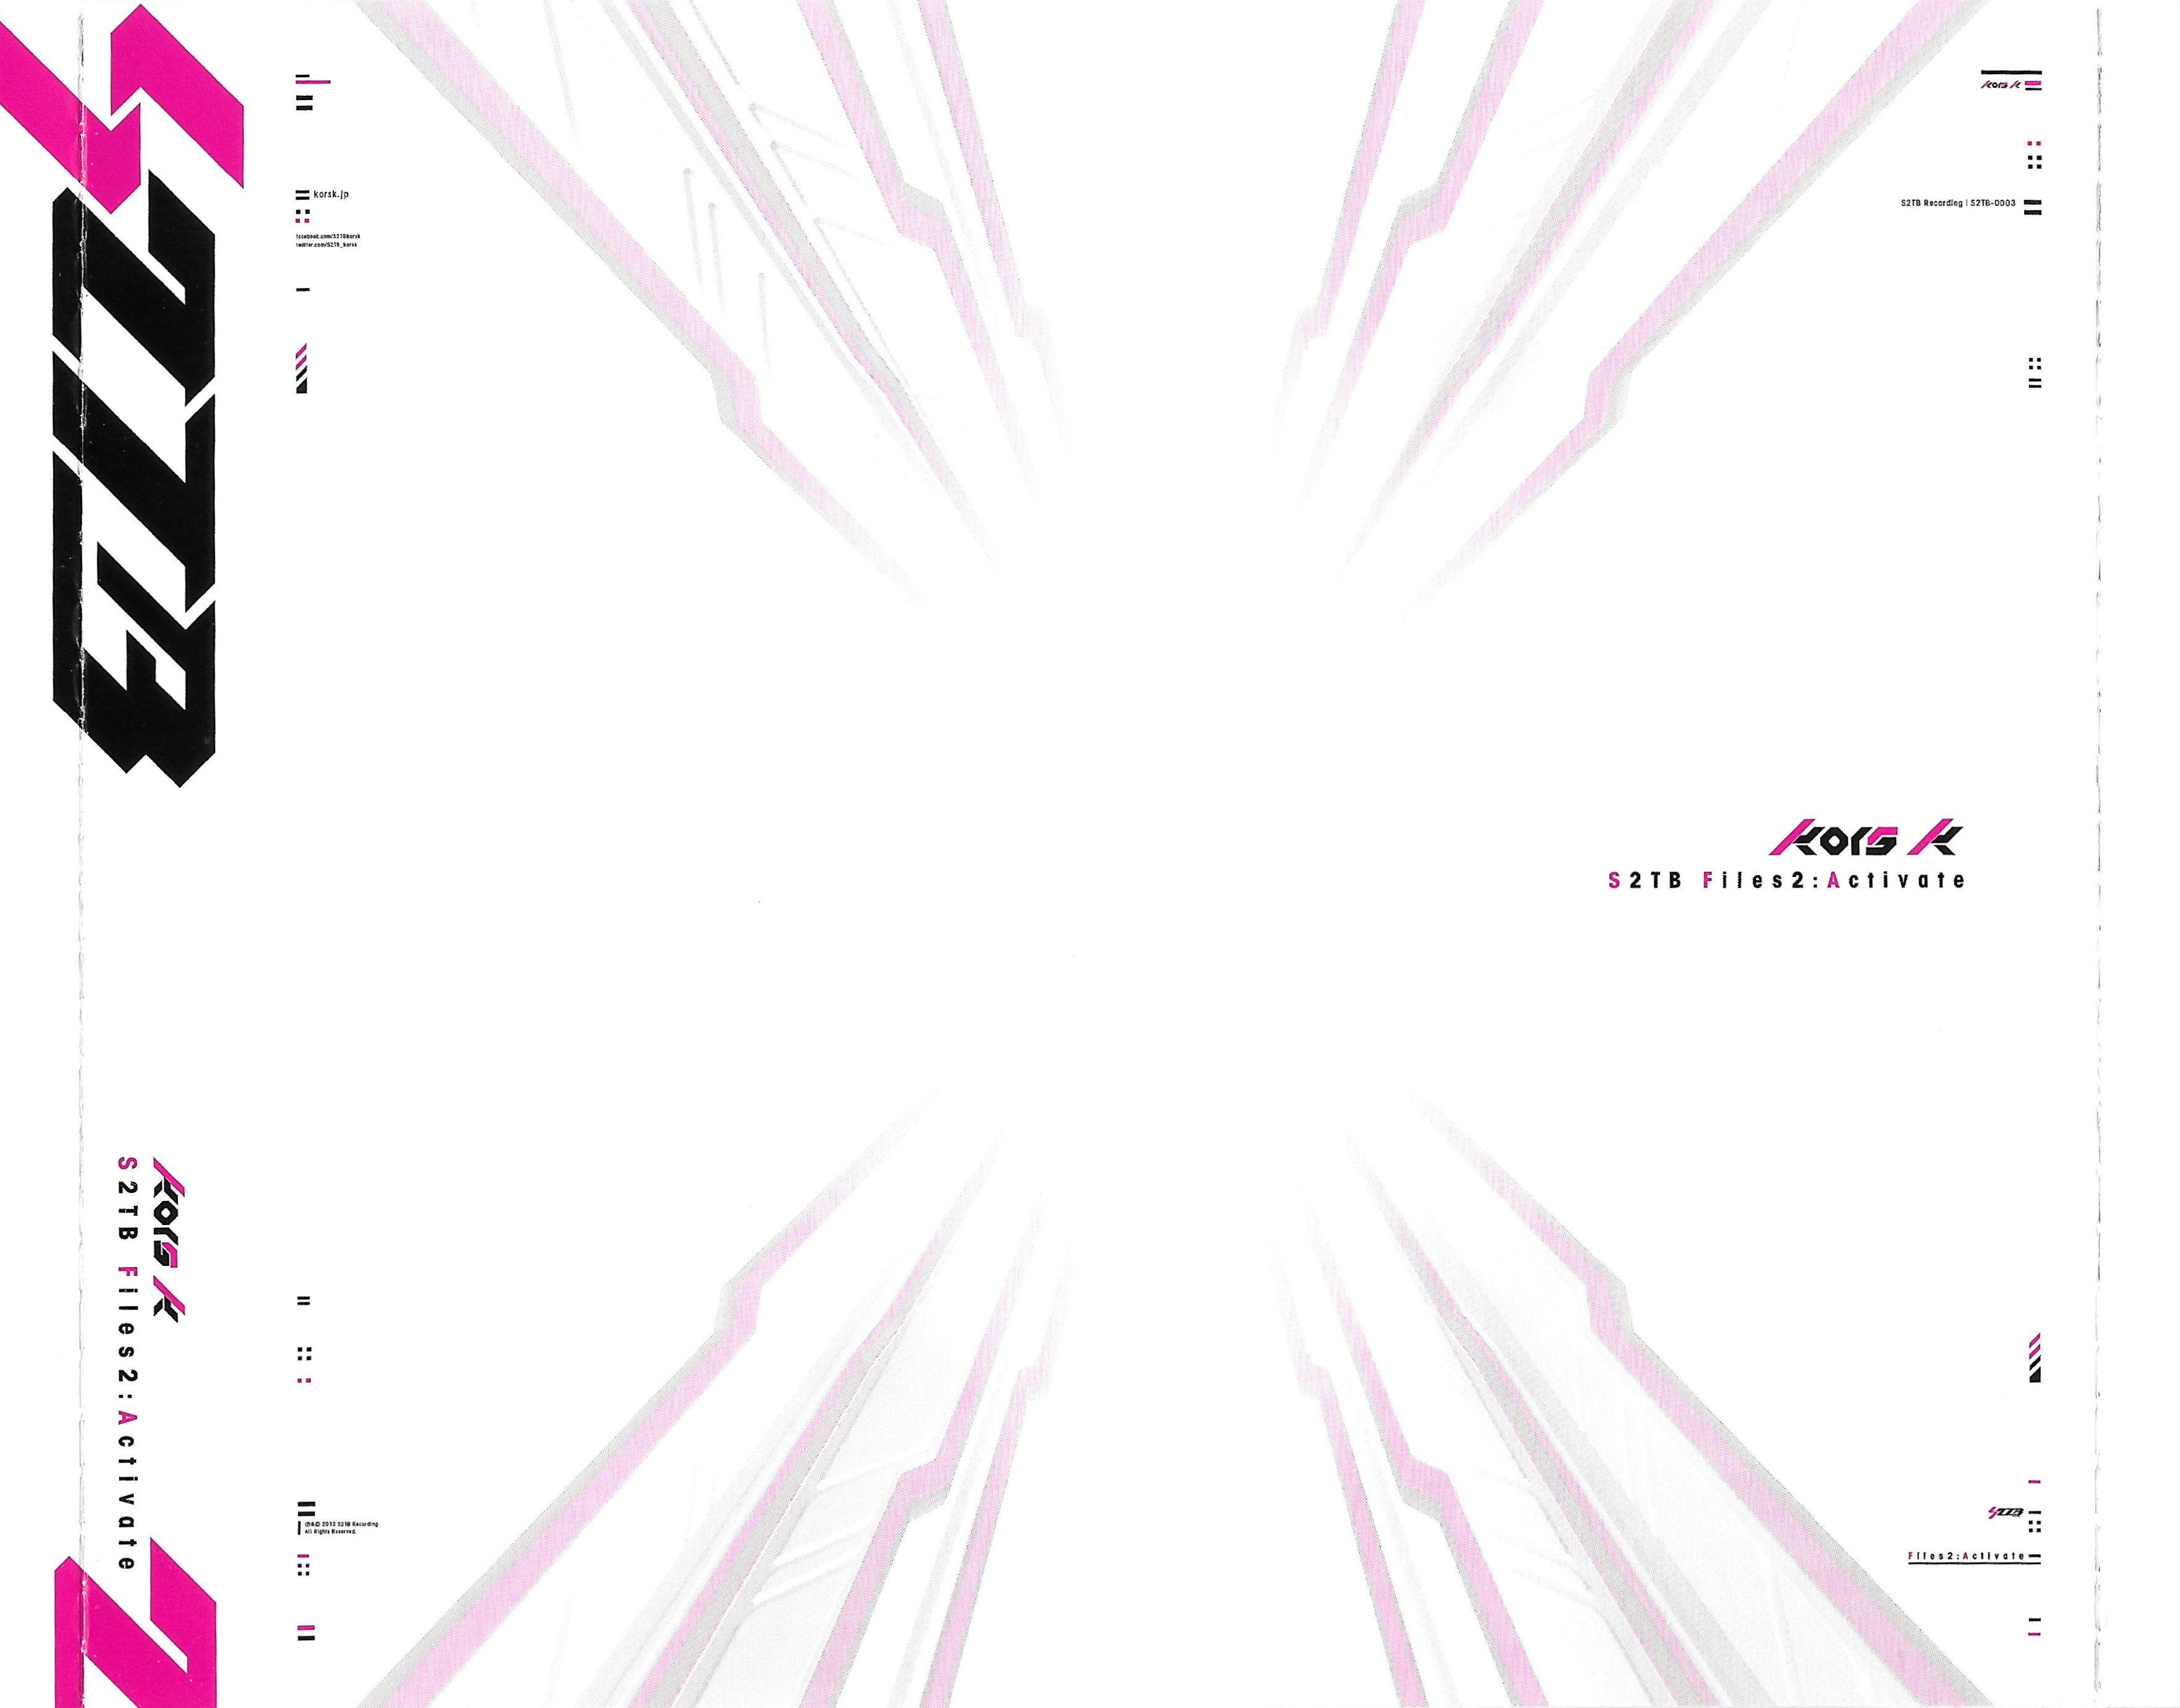 S2TB Files2: Activate / kors k (2012) MP3 - Download S2TB Files2 